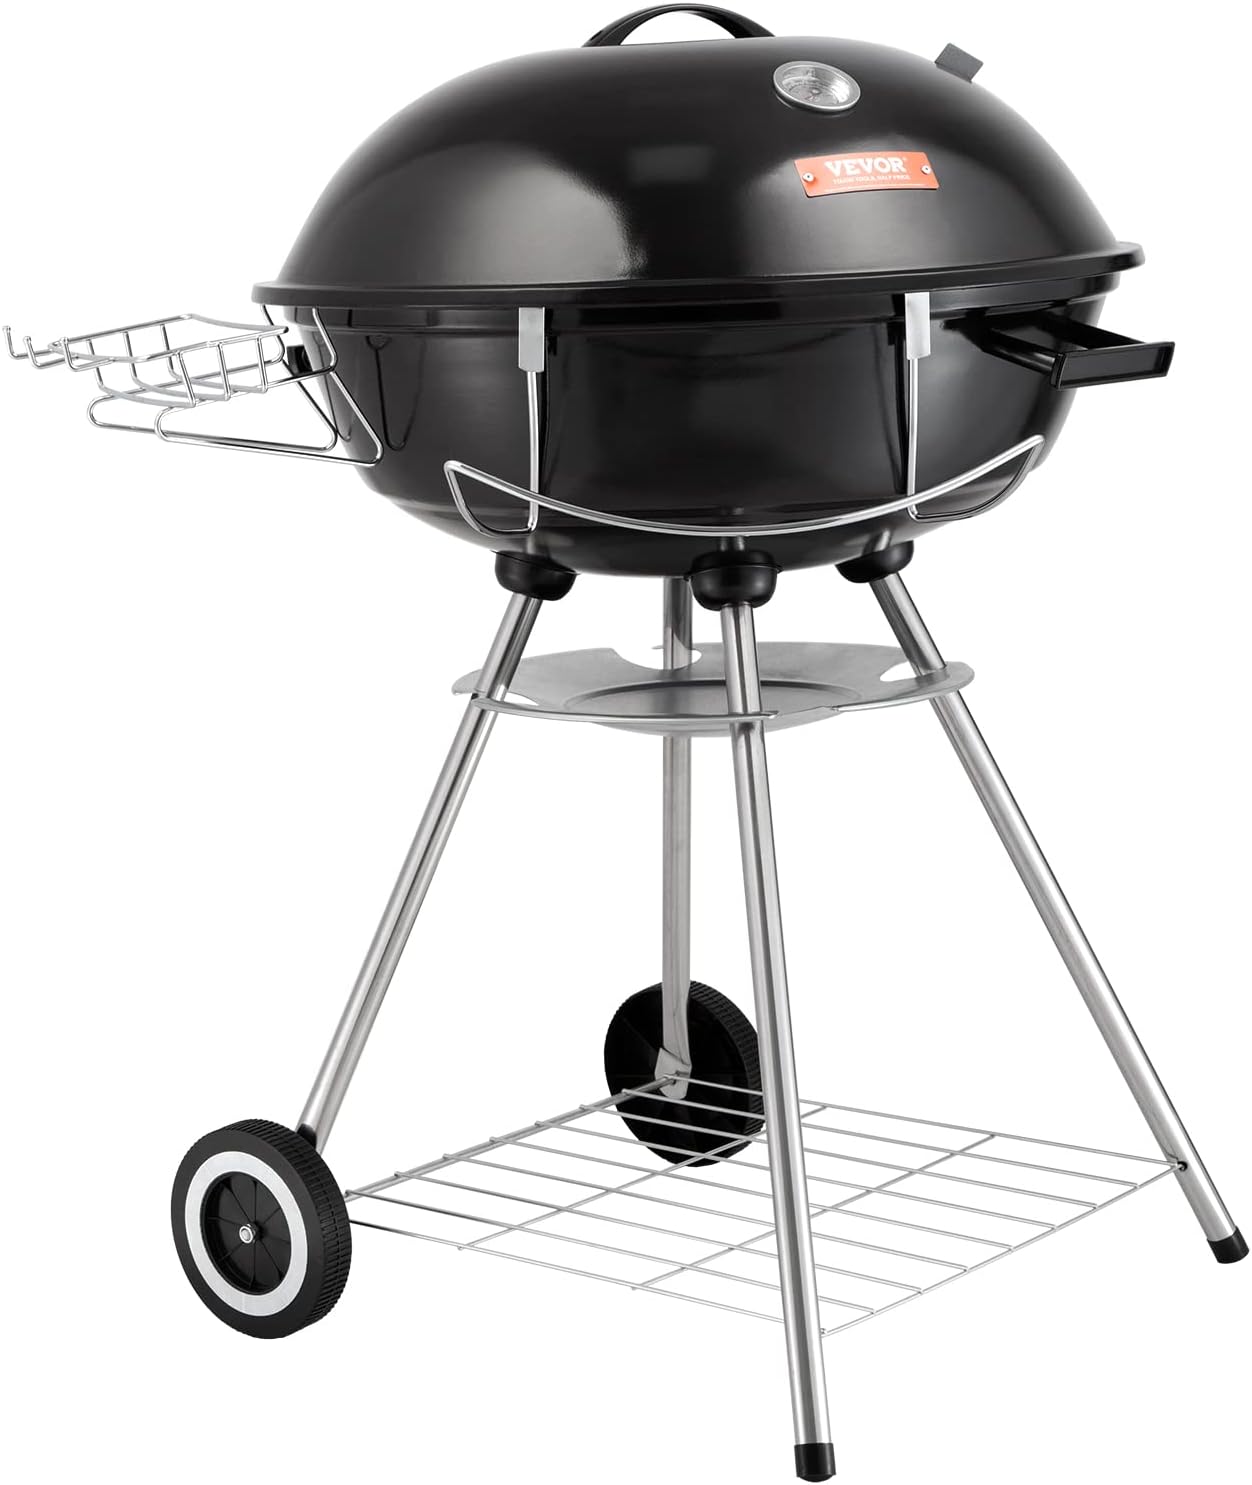 VEVOR 22 inch Charcoal Grill, Portable Charcoal Grill with Wheels for Outdoor, Porcelain-Enameled Lid and Ash Catcher & Thermometer, Round Barbecue Kettle Grill Bowl Wheels for Small Patio Backyard